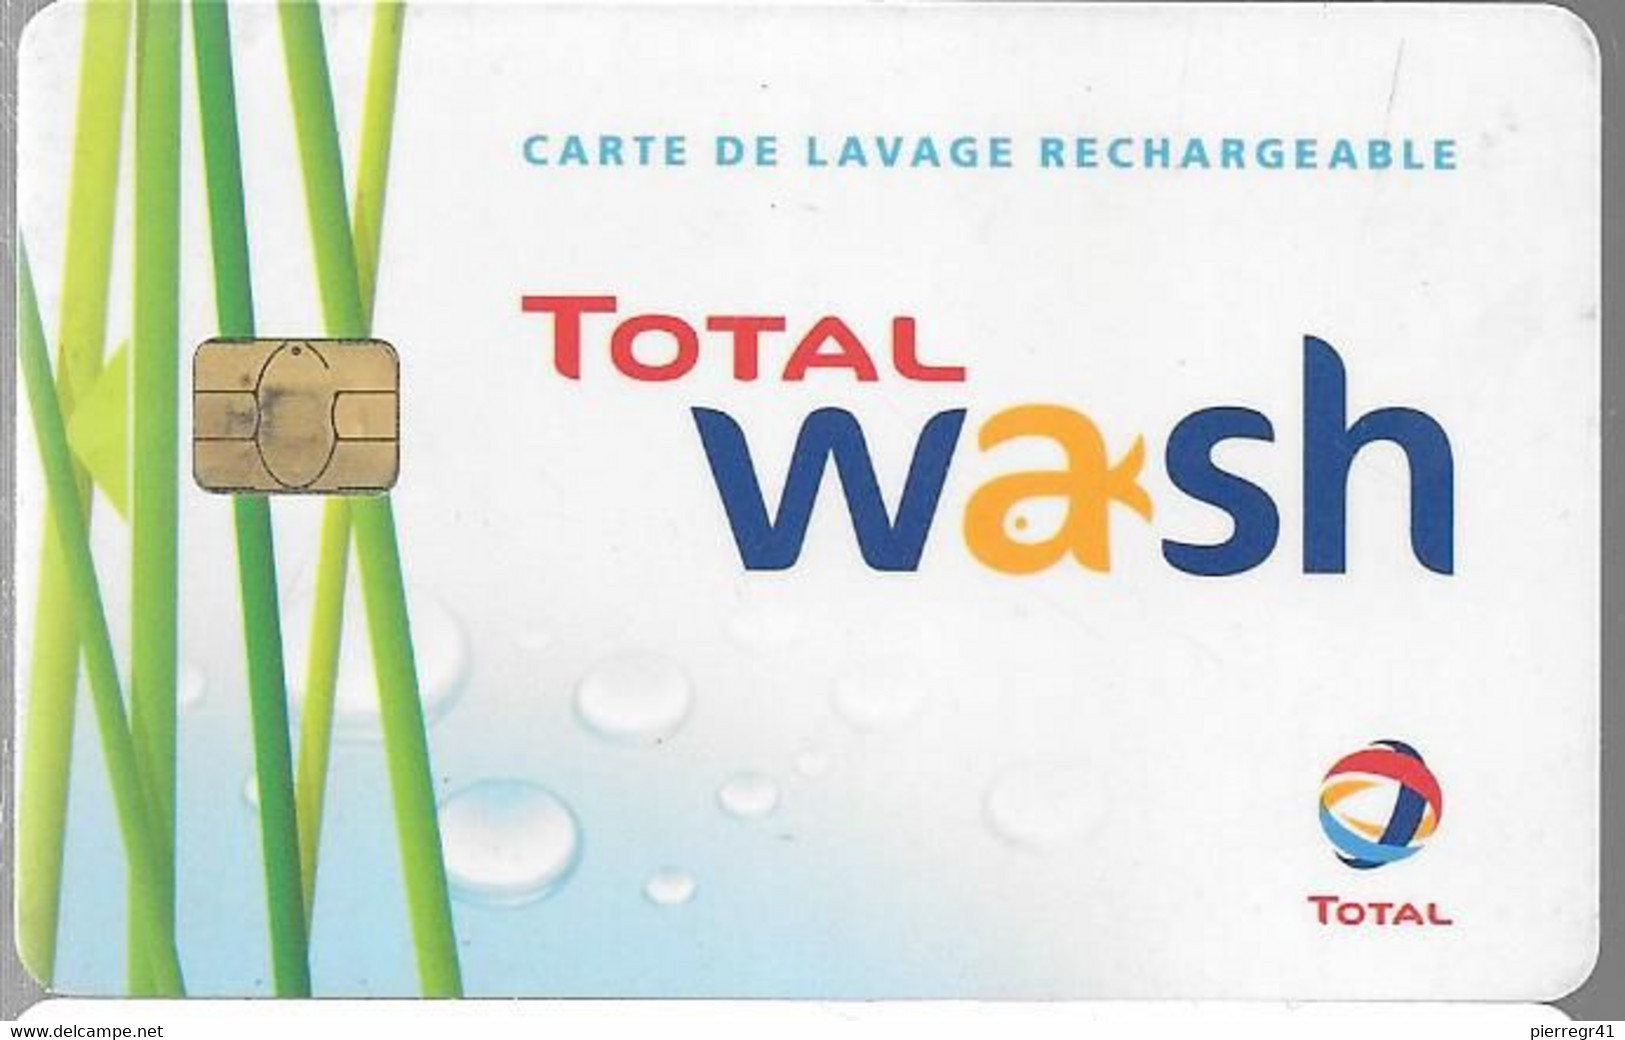 CARTE-PUCE-RECHARGEABLE-LAVAGE-TOTAL WASH-TBE - Car-wash